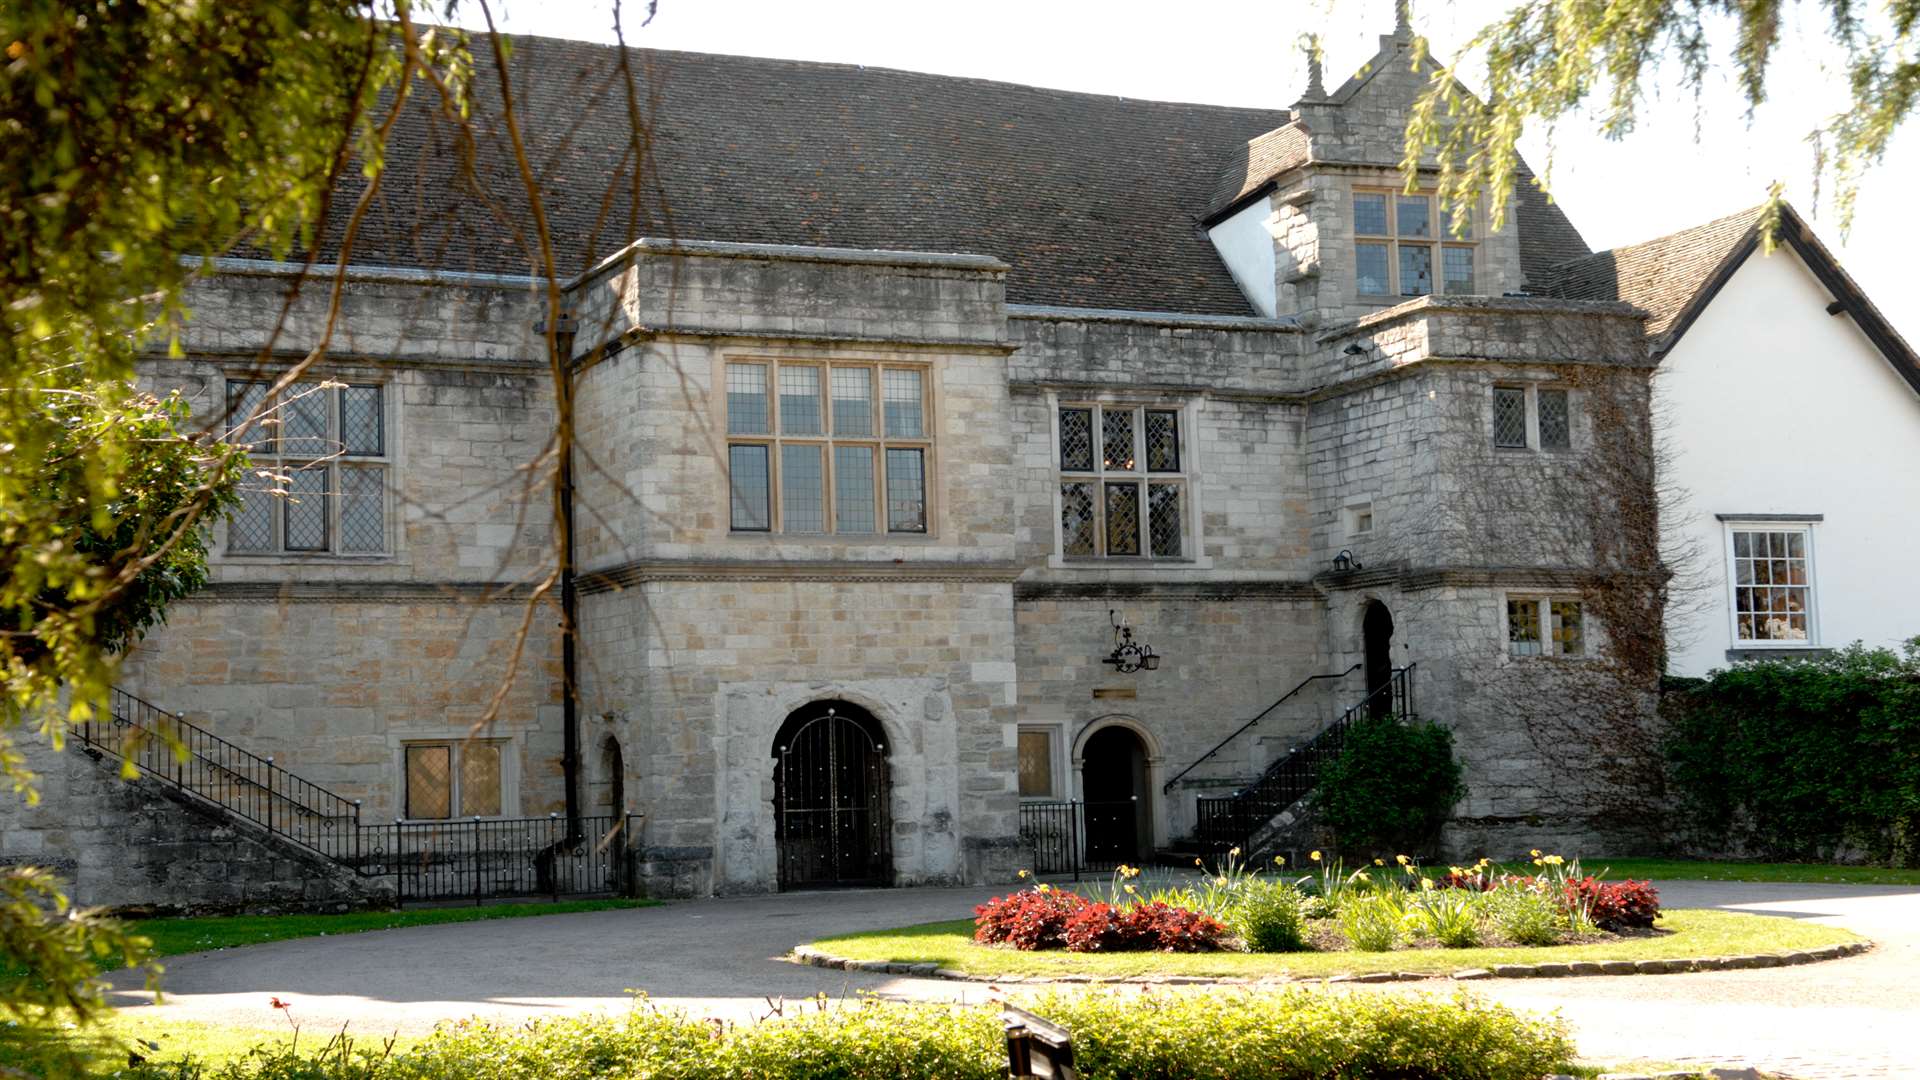 The inquest was at Archbishop's Palace in Maidstone